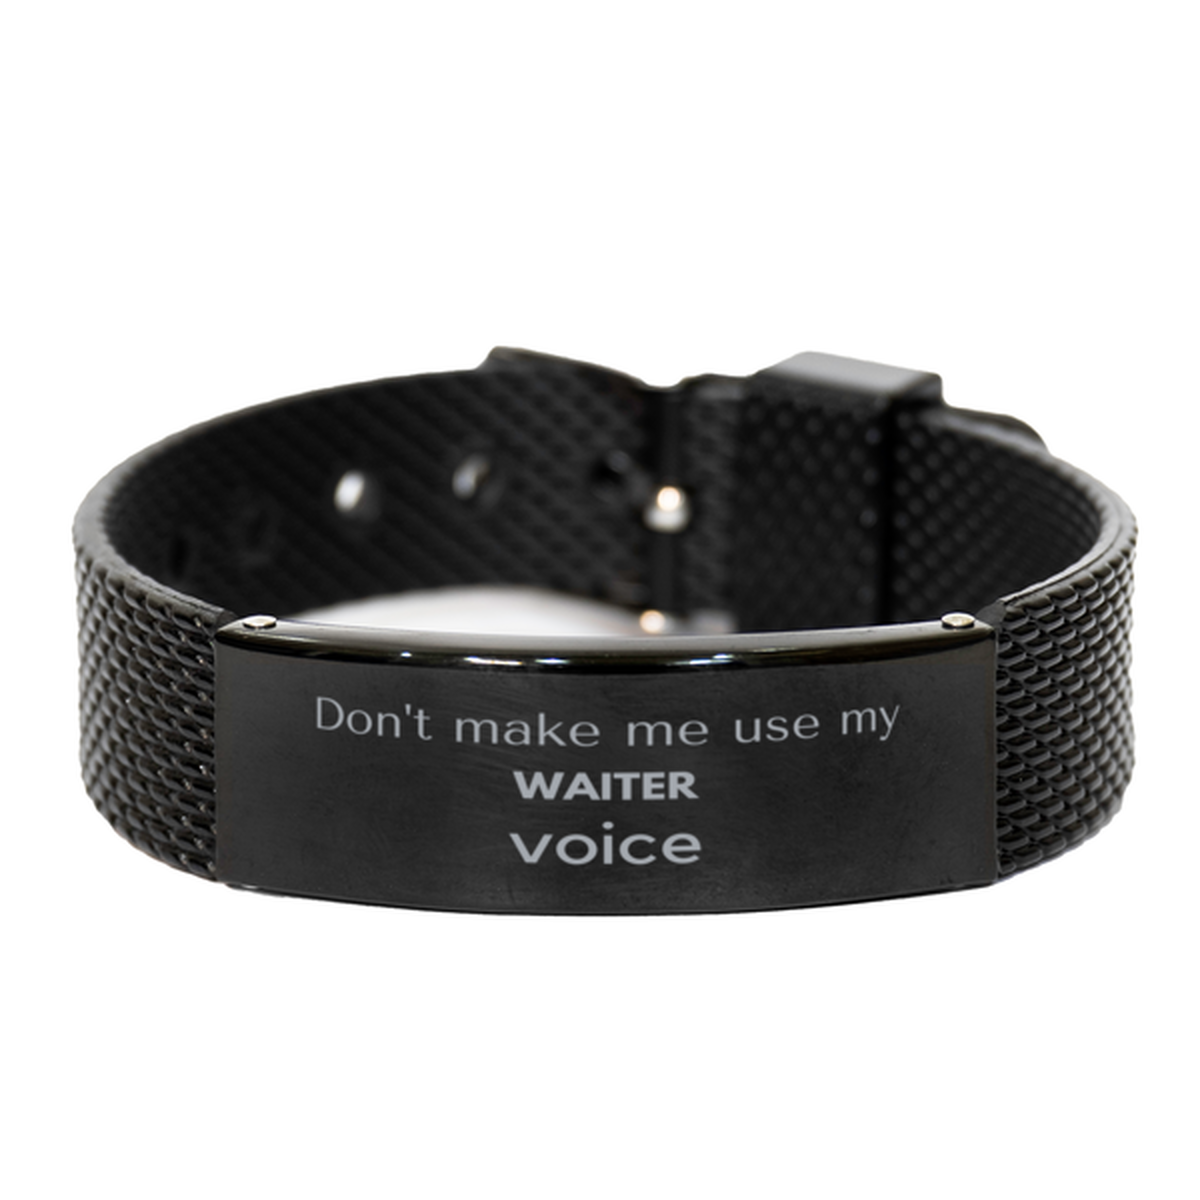 Don't make me use my Waiter voice, Sarcasm Waiter Gifts, Christmas Waiter Black Shark Mesh Bracelet Birthday Unique Gifts For Waiter Coworkers, Men, Women, Colleague, Friends